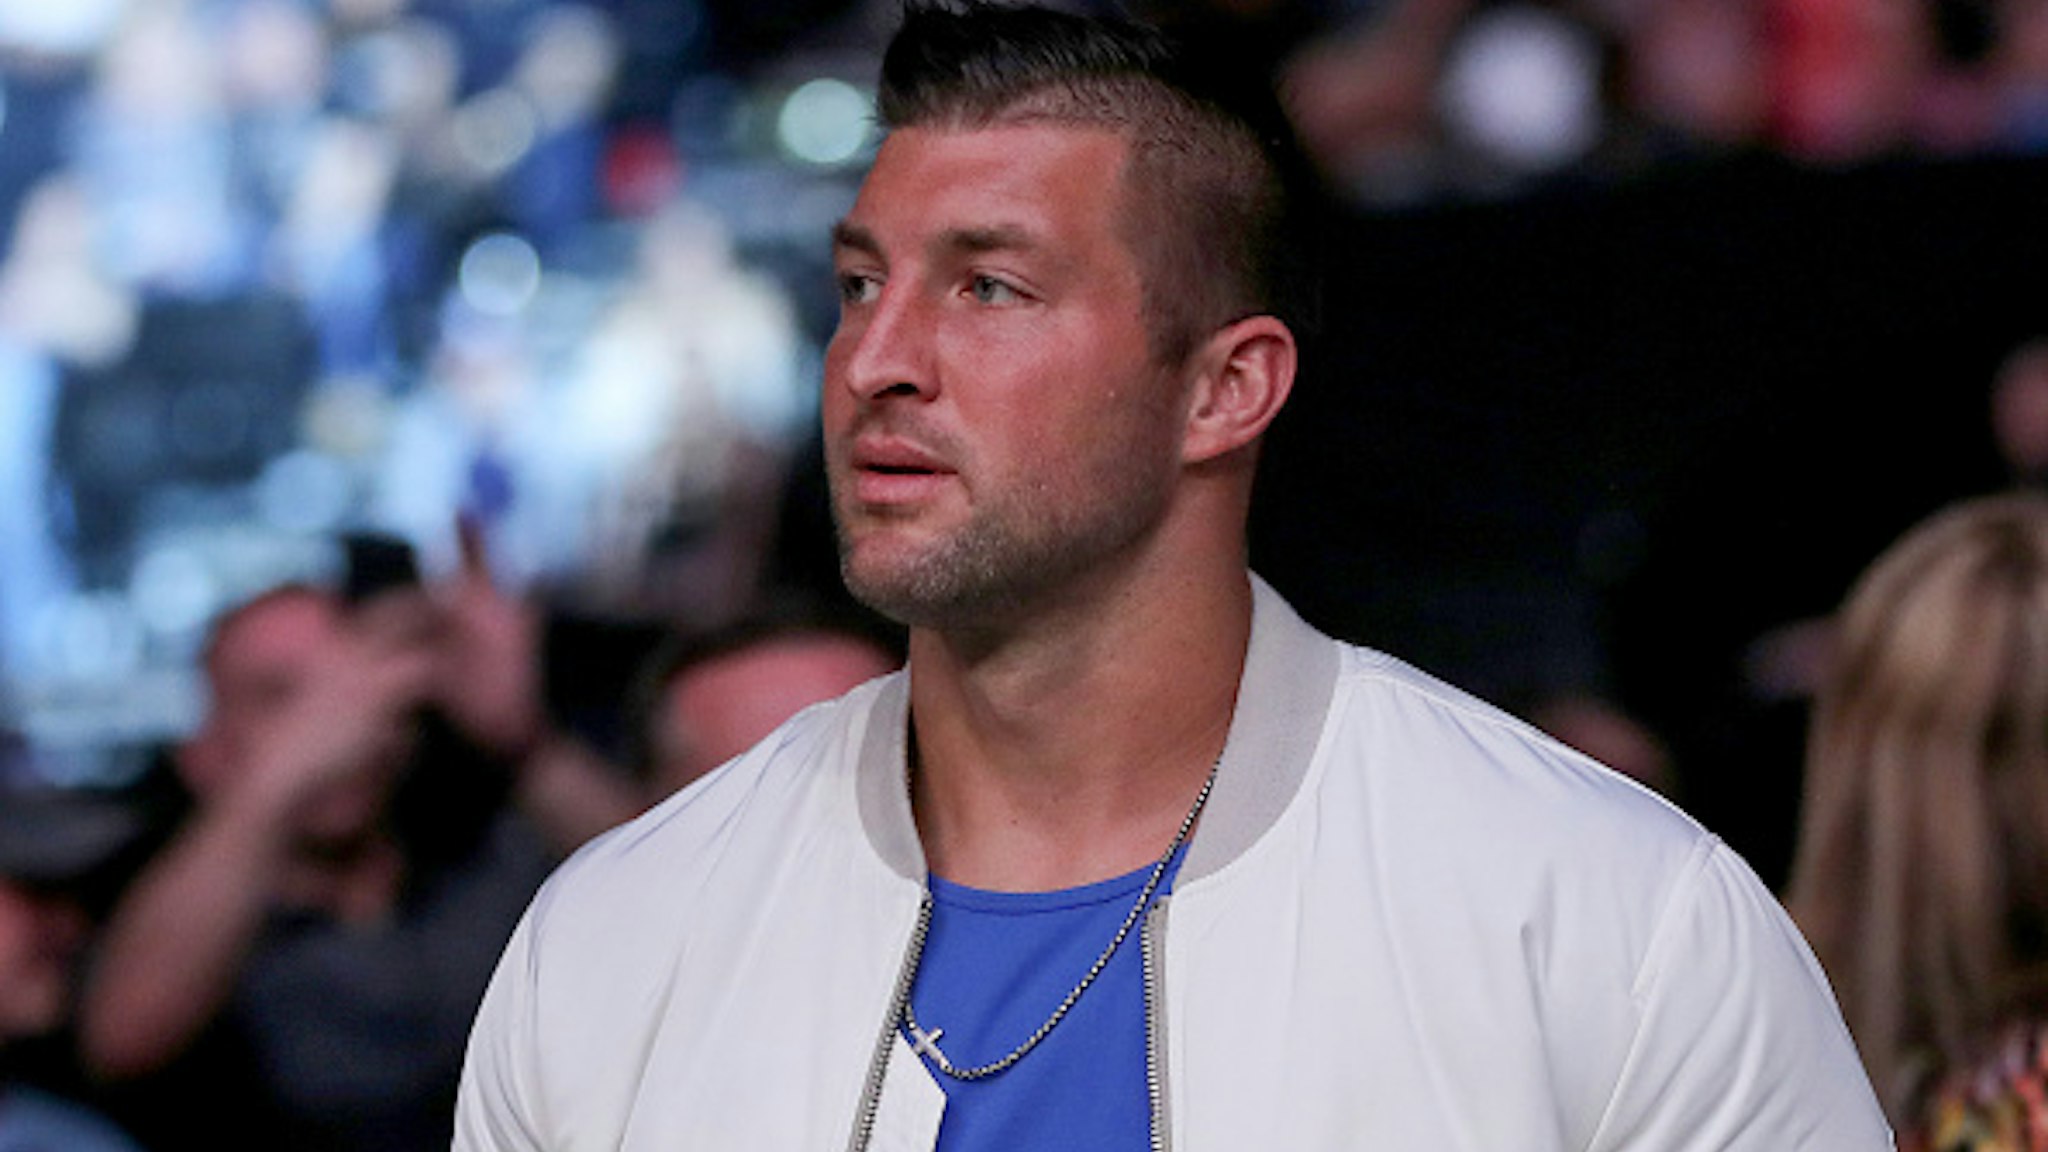 JACKSONVILLE, FL - APRIL 24: Tim Tebow is seen by the octagon during UFC 261 at VyStar Veterans Memorial Arena on April 24, 2021 in Jacksonville, Florida.